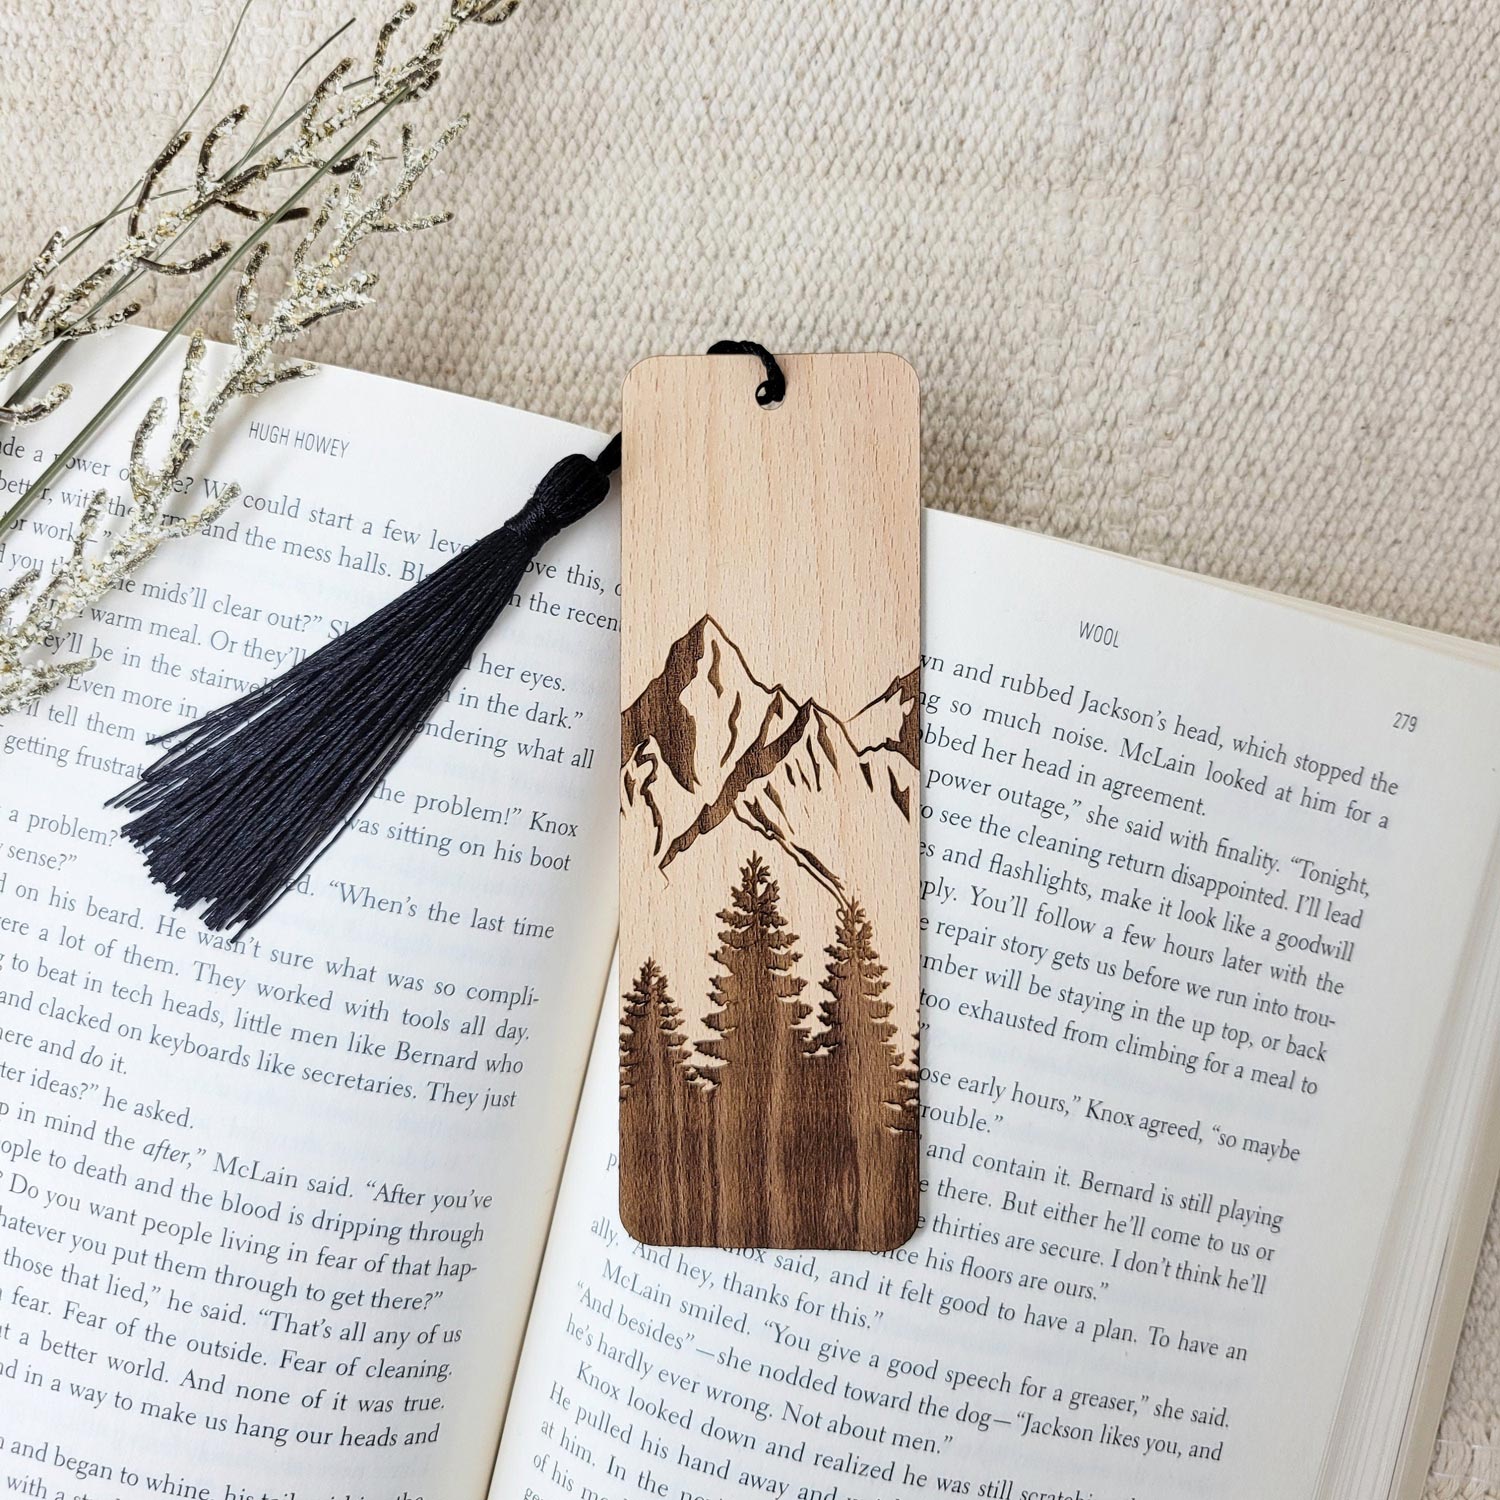 New without tag Set of 5 engraved wooden bookmarks. Unique